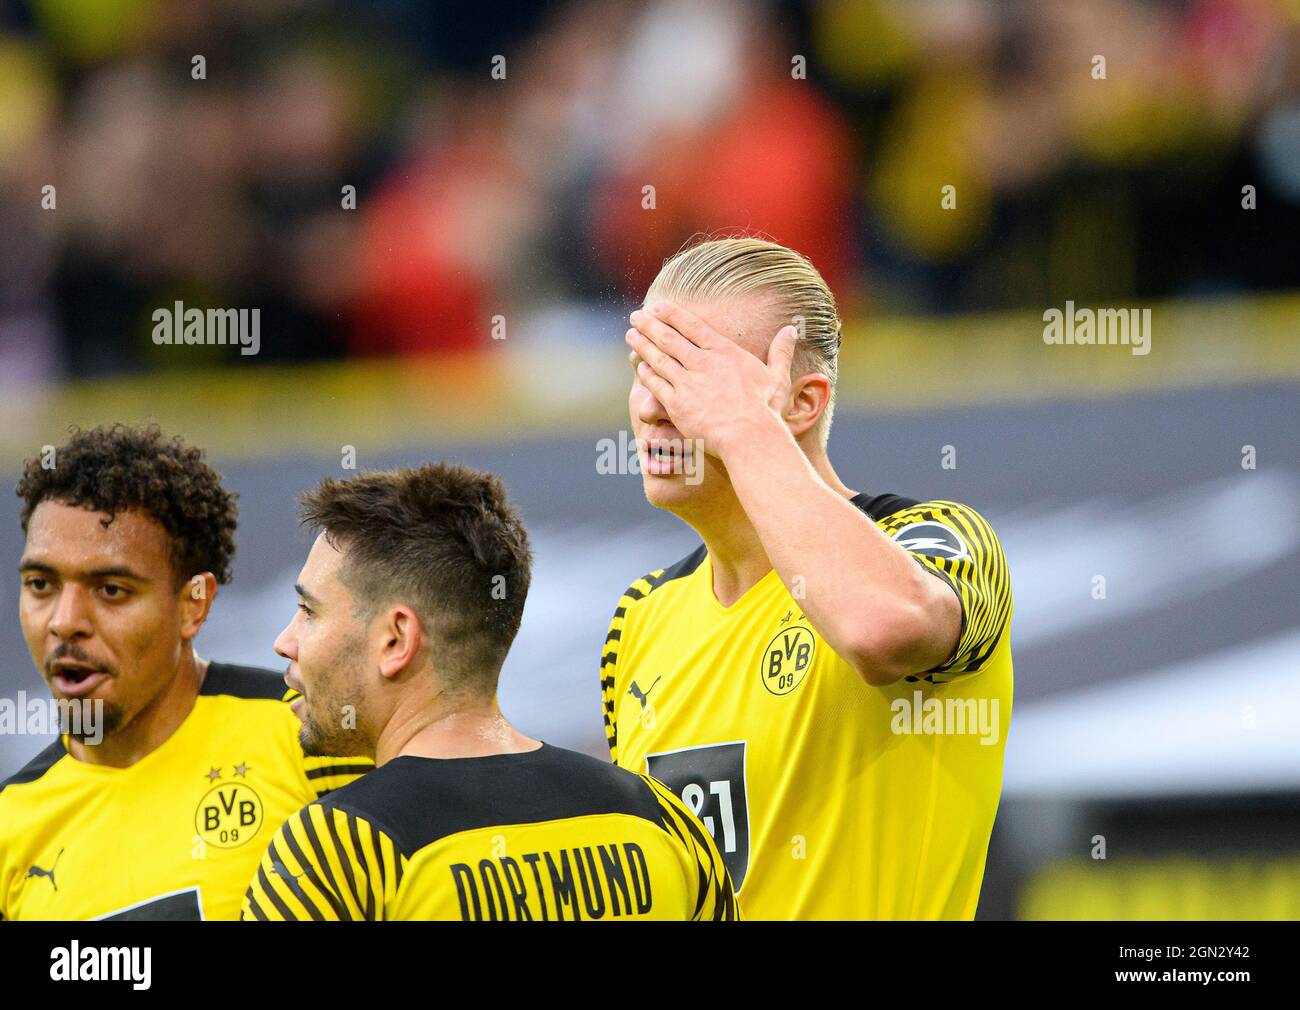 jubilation Erling HAALAND (DO) after his goal to 2-0, shows how he scored the goal with the head, gesture, gesture, left to right Donyell MALEN (DO), Raphael GUERREIRO (DO), Erling HAALAND (DO) Soccer 1st Bundesliga, 5th matchday, Borussia Dortmund (DO) - Union Berlin (UB) on September 19, 2021 in Dortmund/Germany. #DFL regulations prohibit any use of photographs as image sequences and/or quasi-video # Â Stock Photo